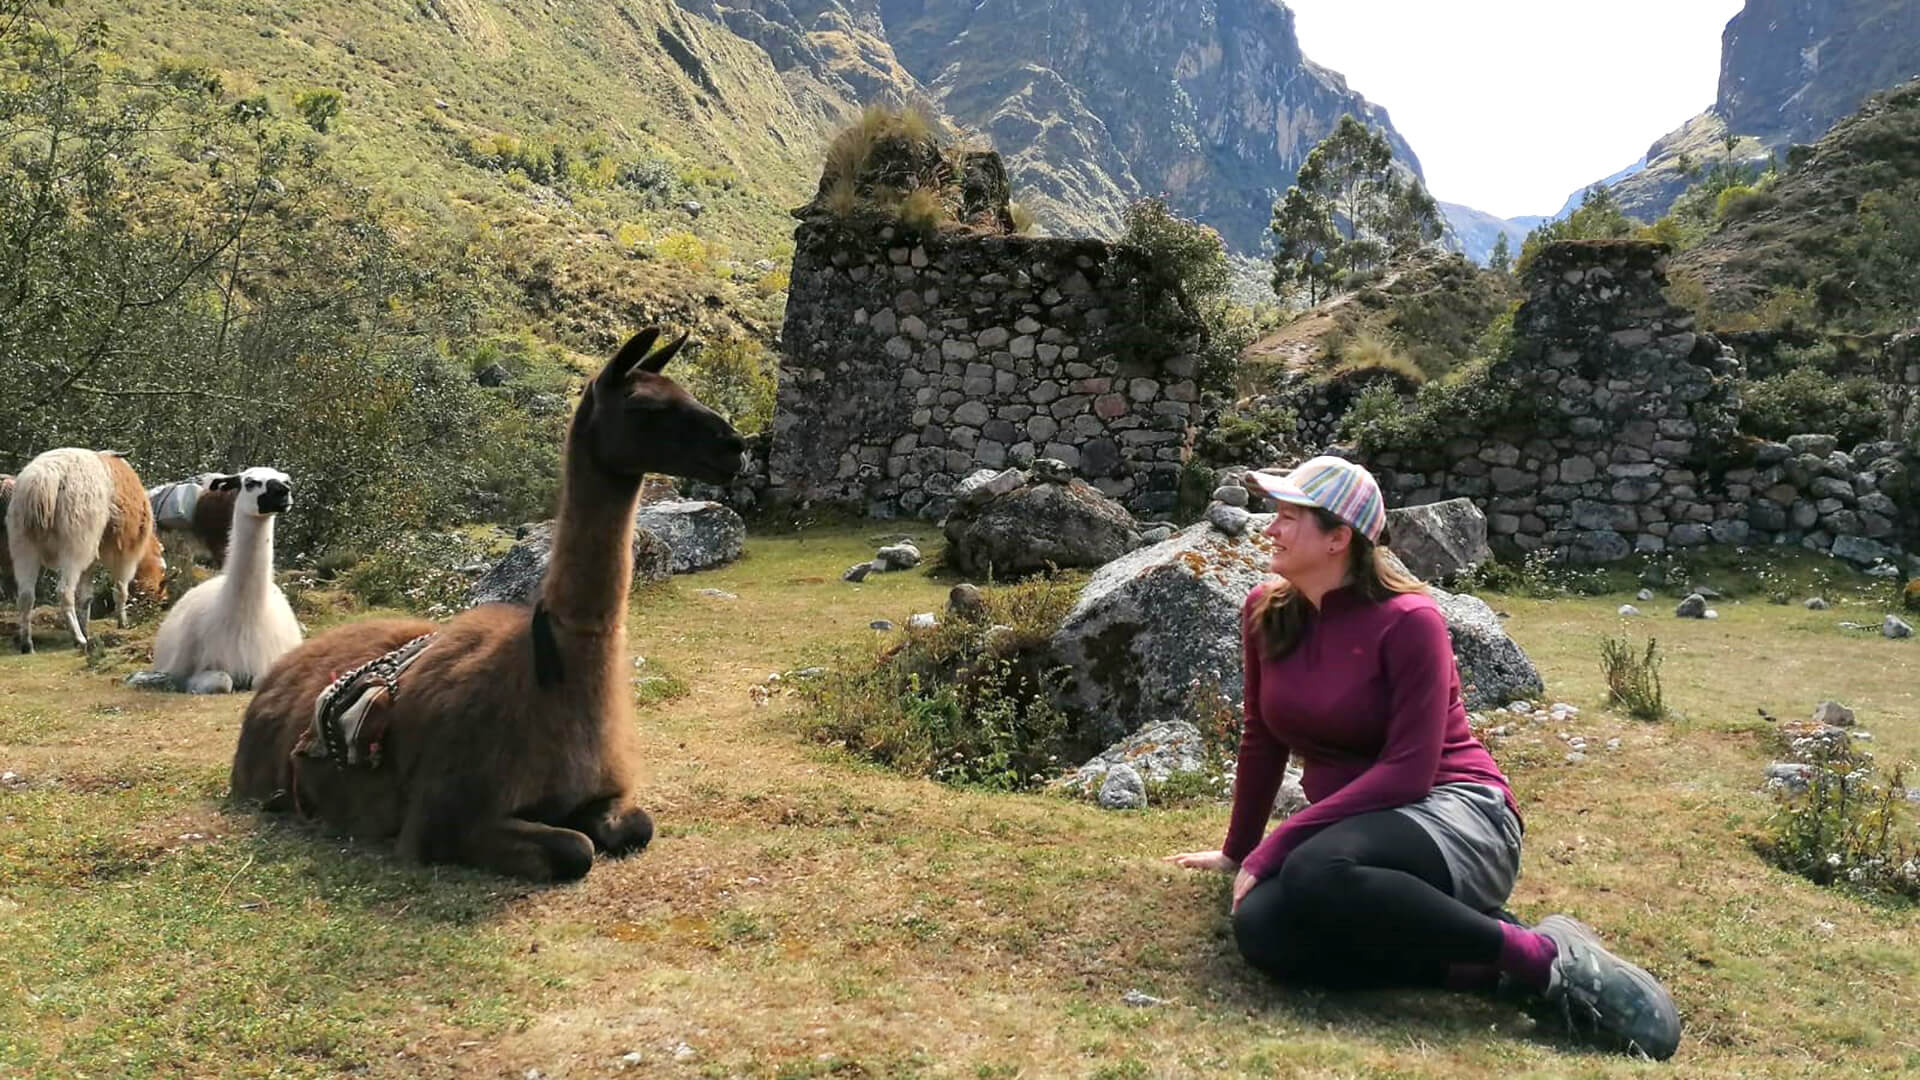 Llama and hiker resting at ruins in mountain landscape